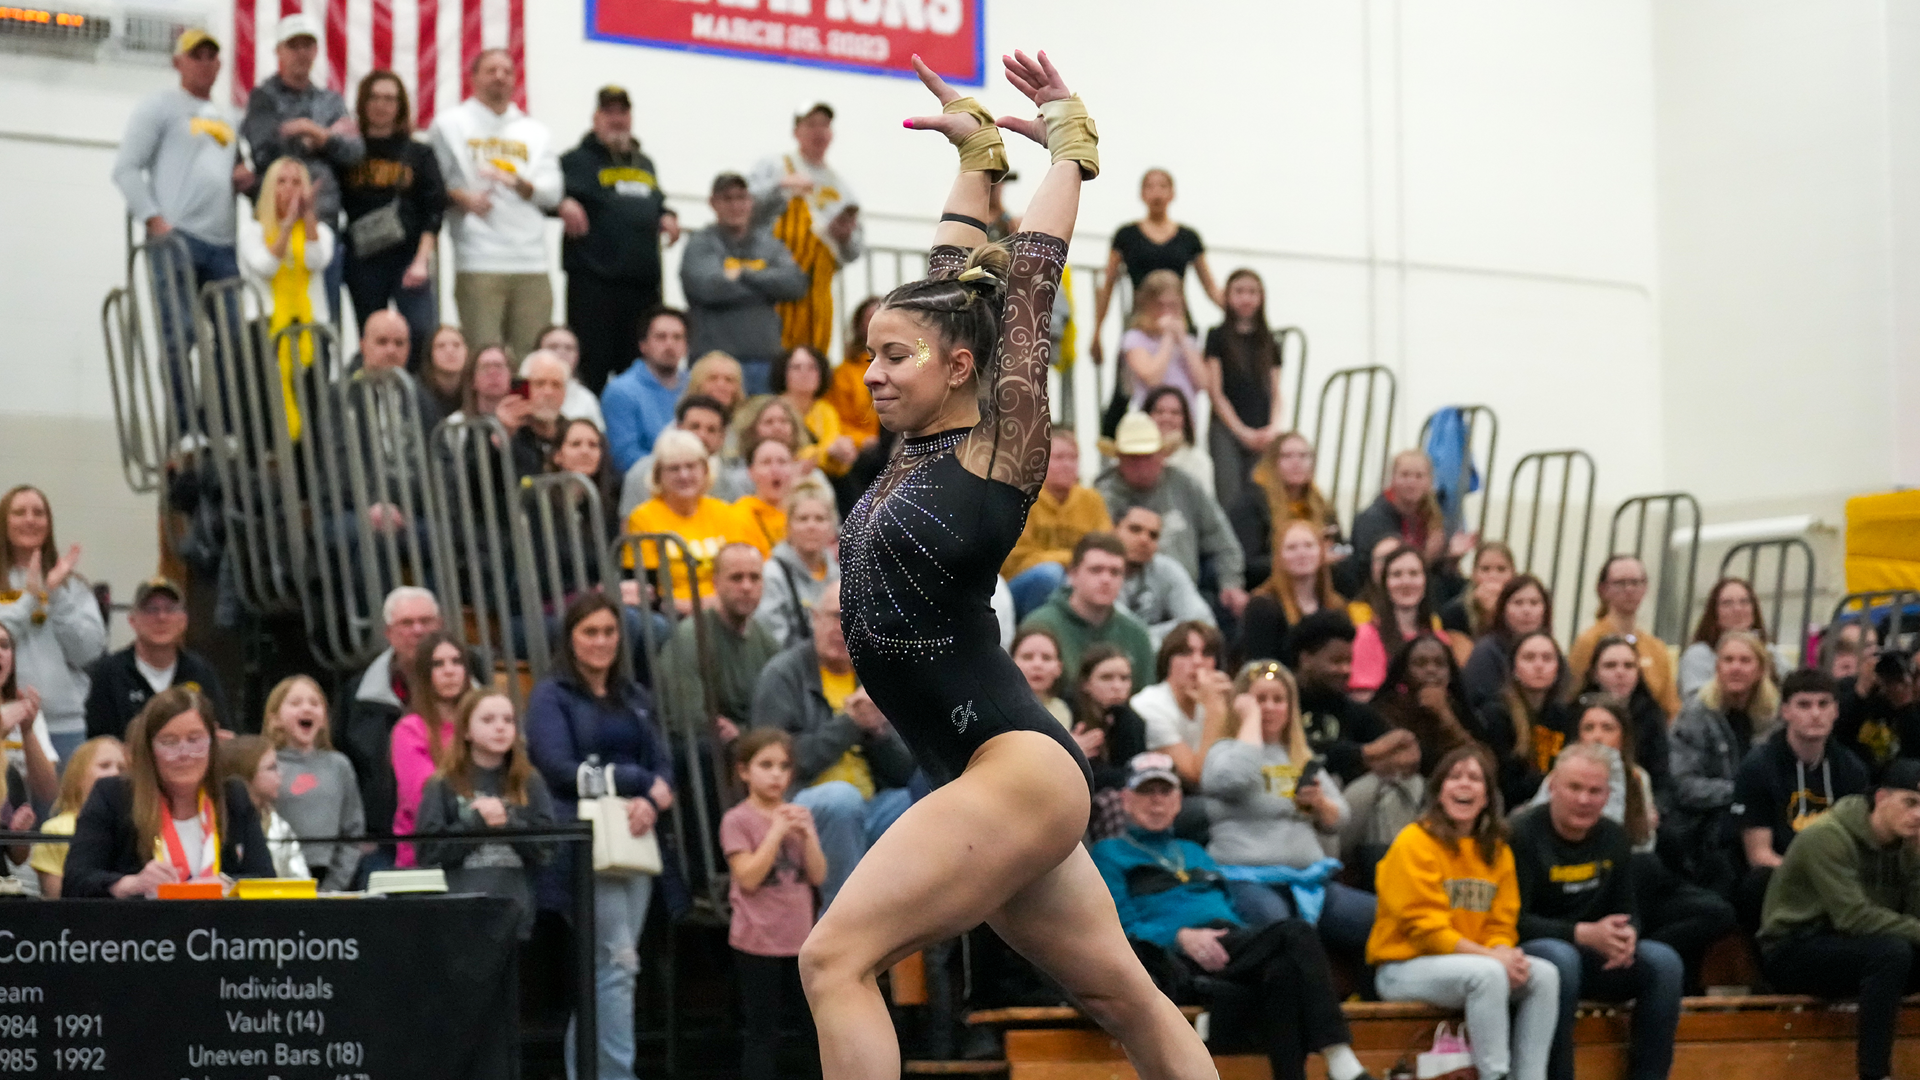 Delaney Cienkus scored 9.800 point on the floor exercise and 9.650 points on the balance beam in the Titans' win over UW-La Crosse and UW-Stout on Thursday night. Photo Credit: Terri Cole, UW-Oshkosh Sports Information